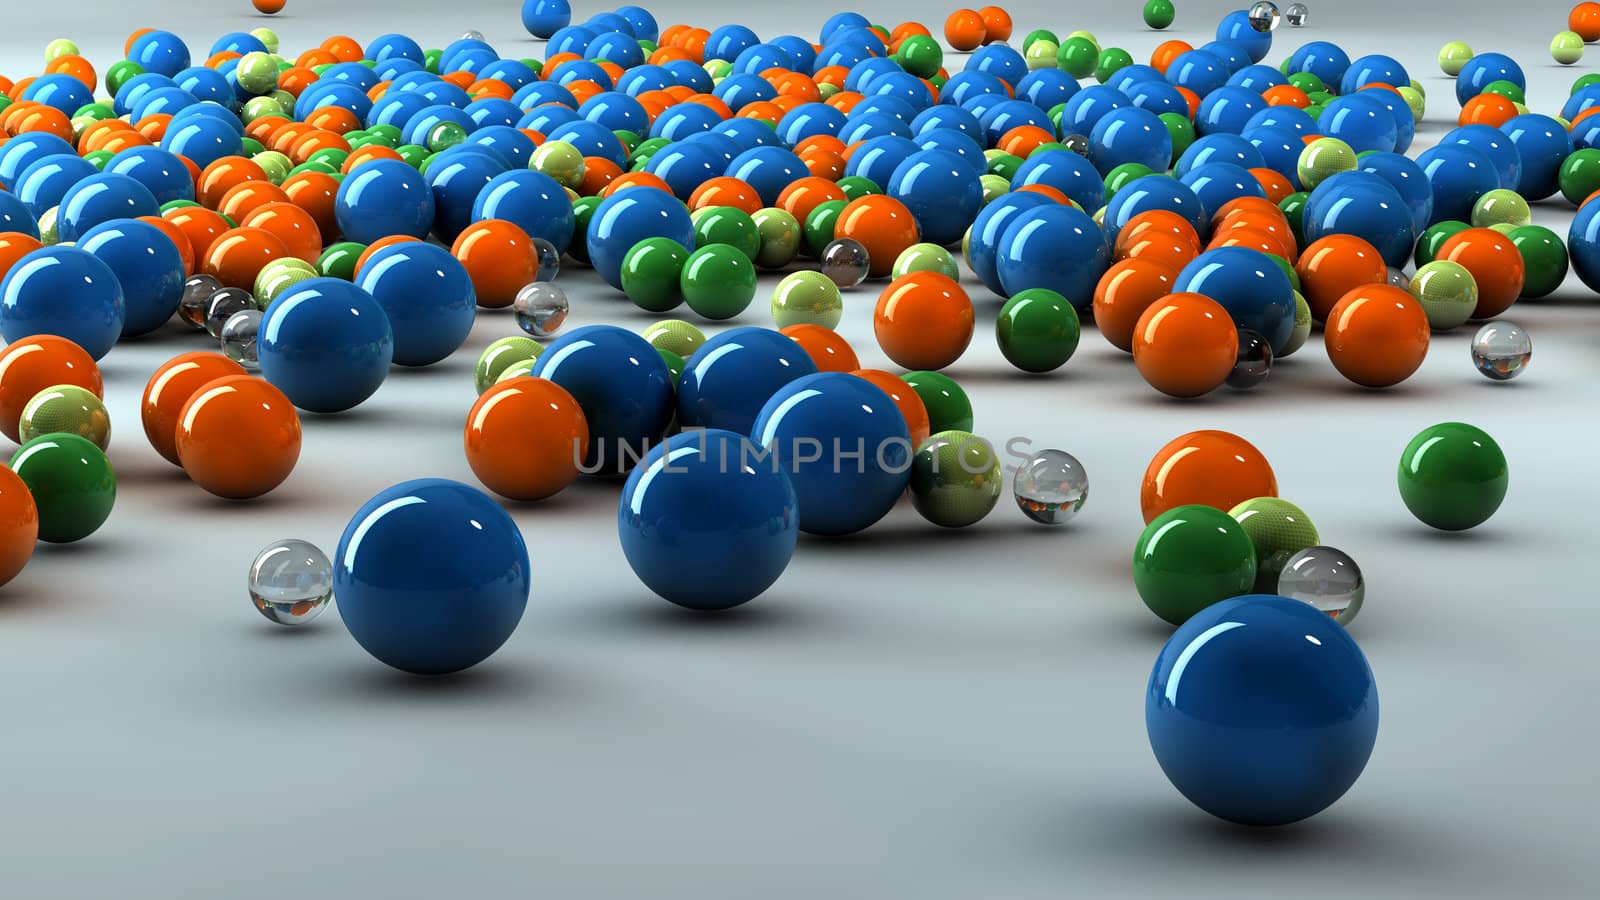 Colorful 3D spheres